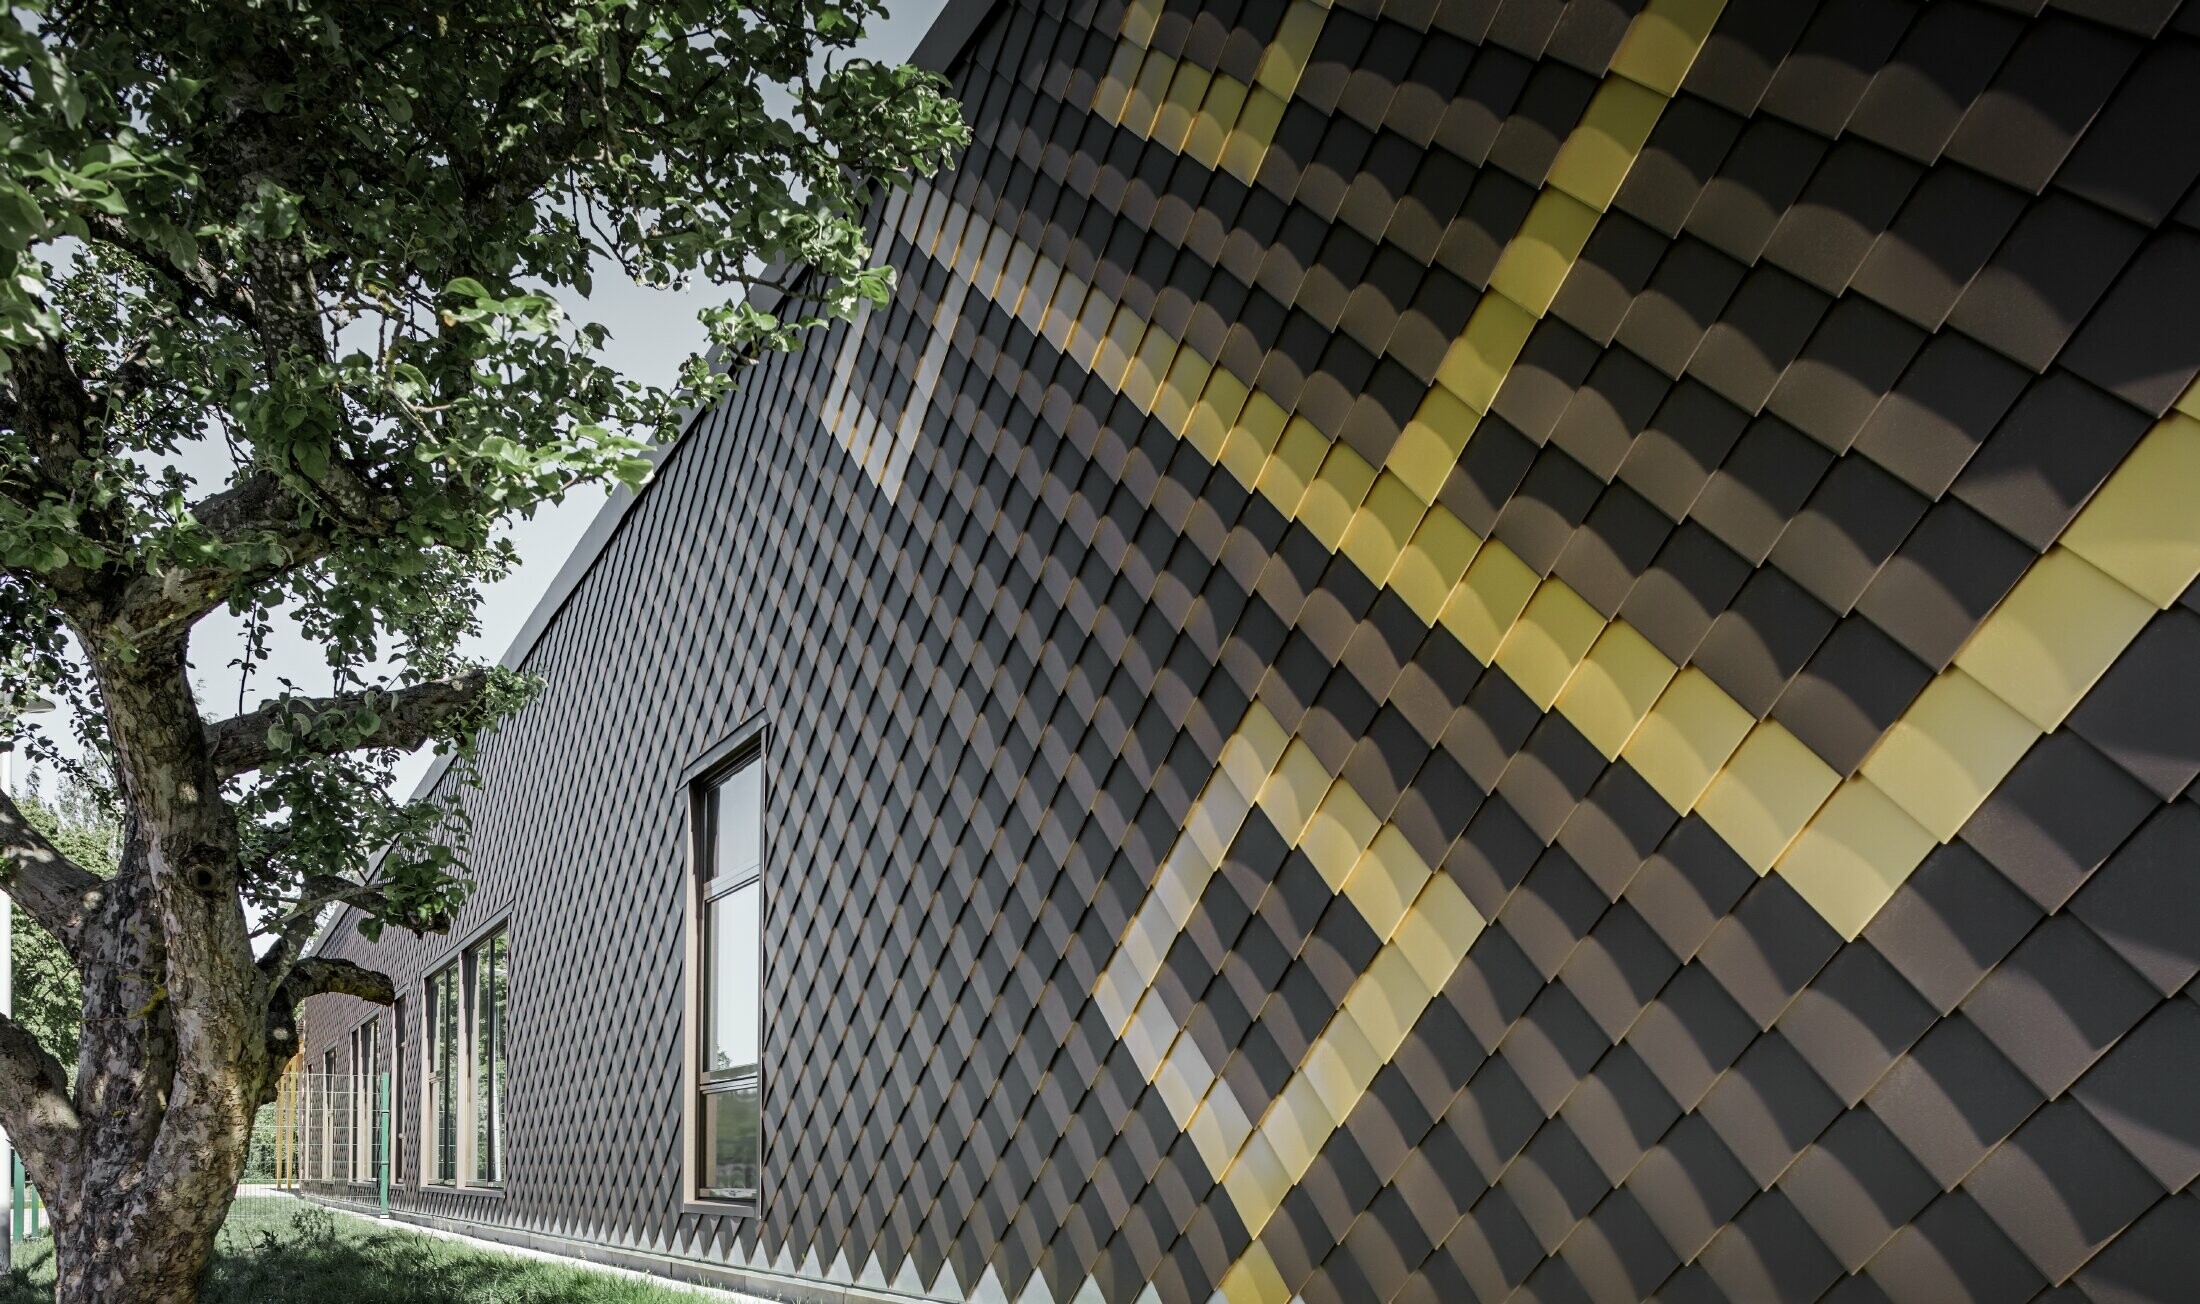 PREFA rhomboid tiles were used for the façade of the nursery school in Stockholm. The exterior façade is beautifully designed in brown and Mayan gold.